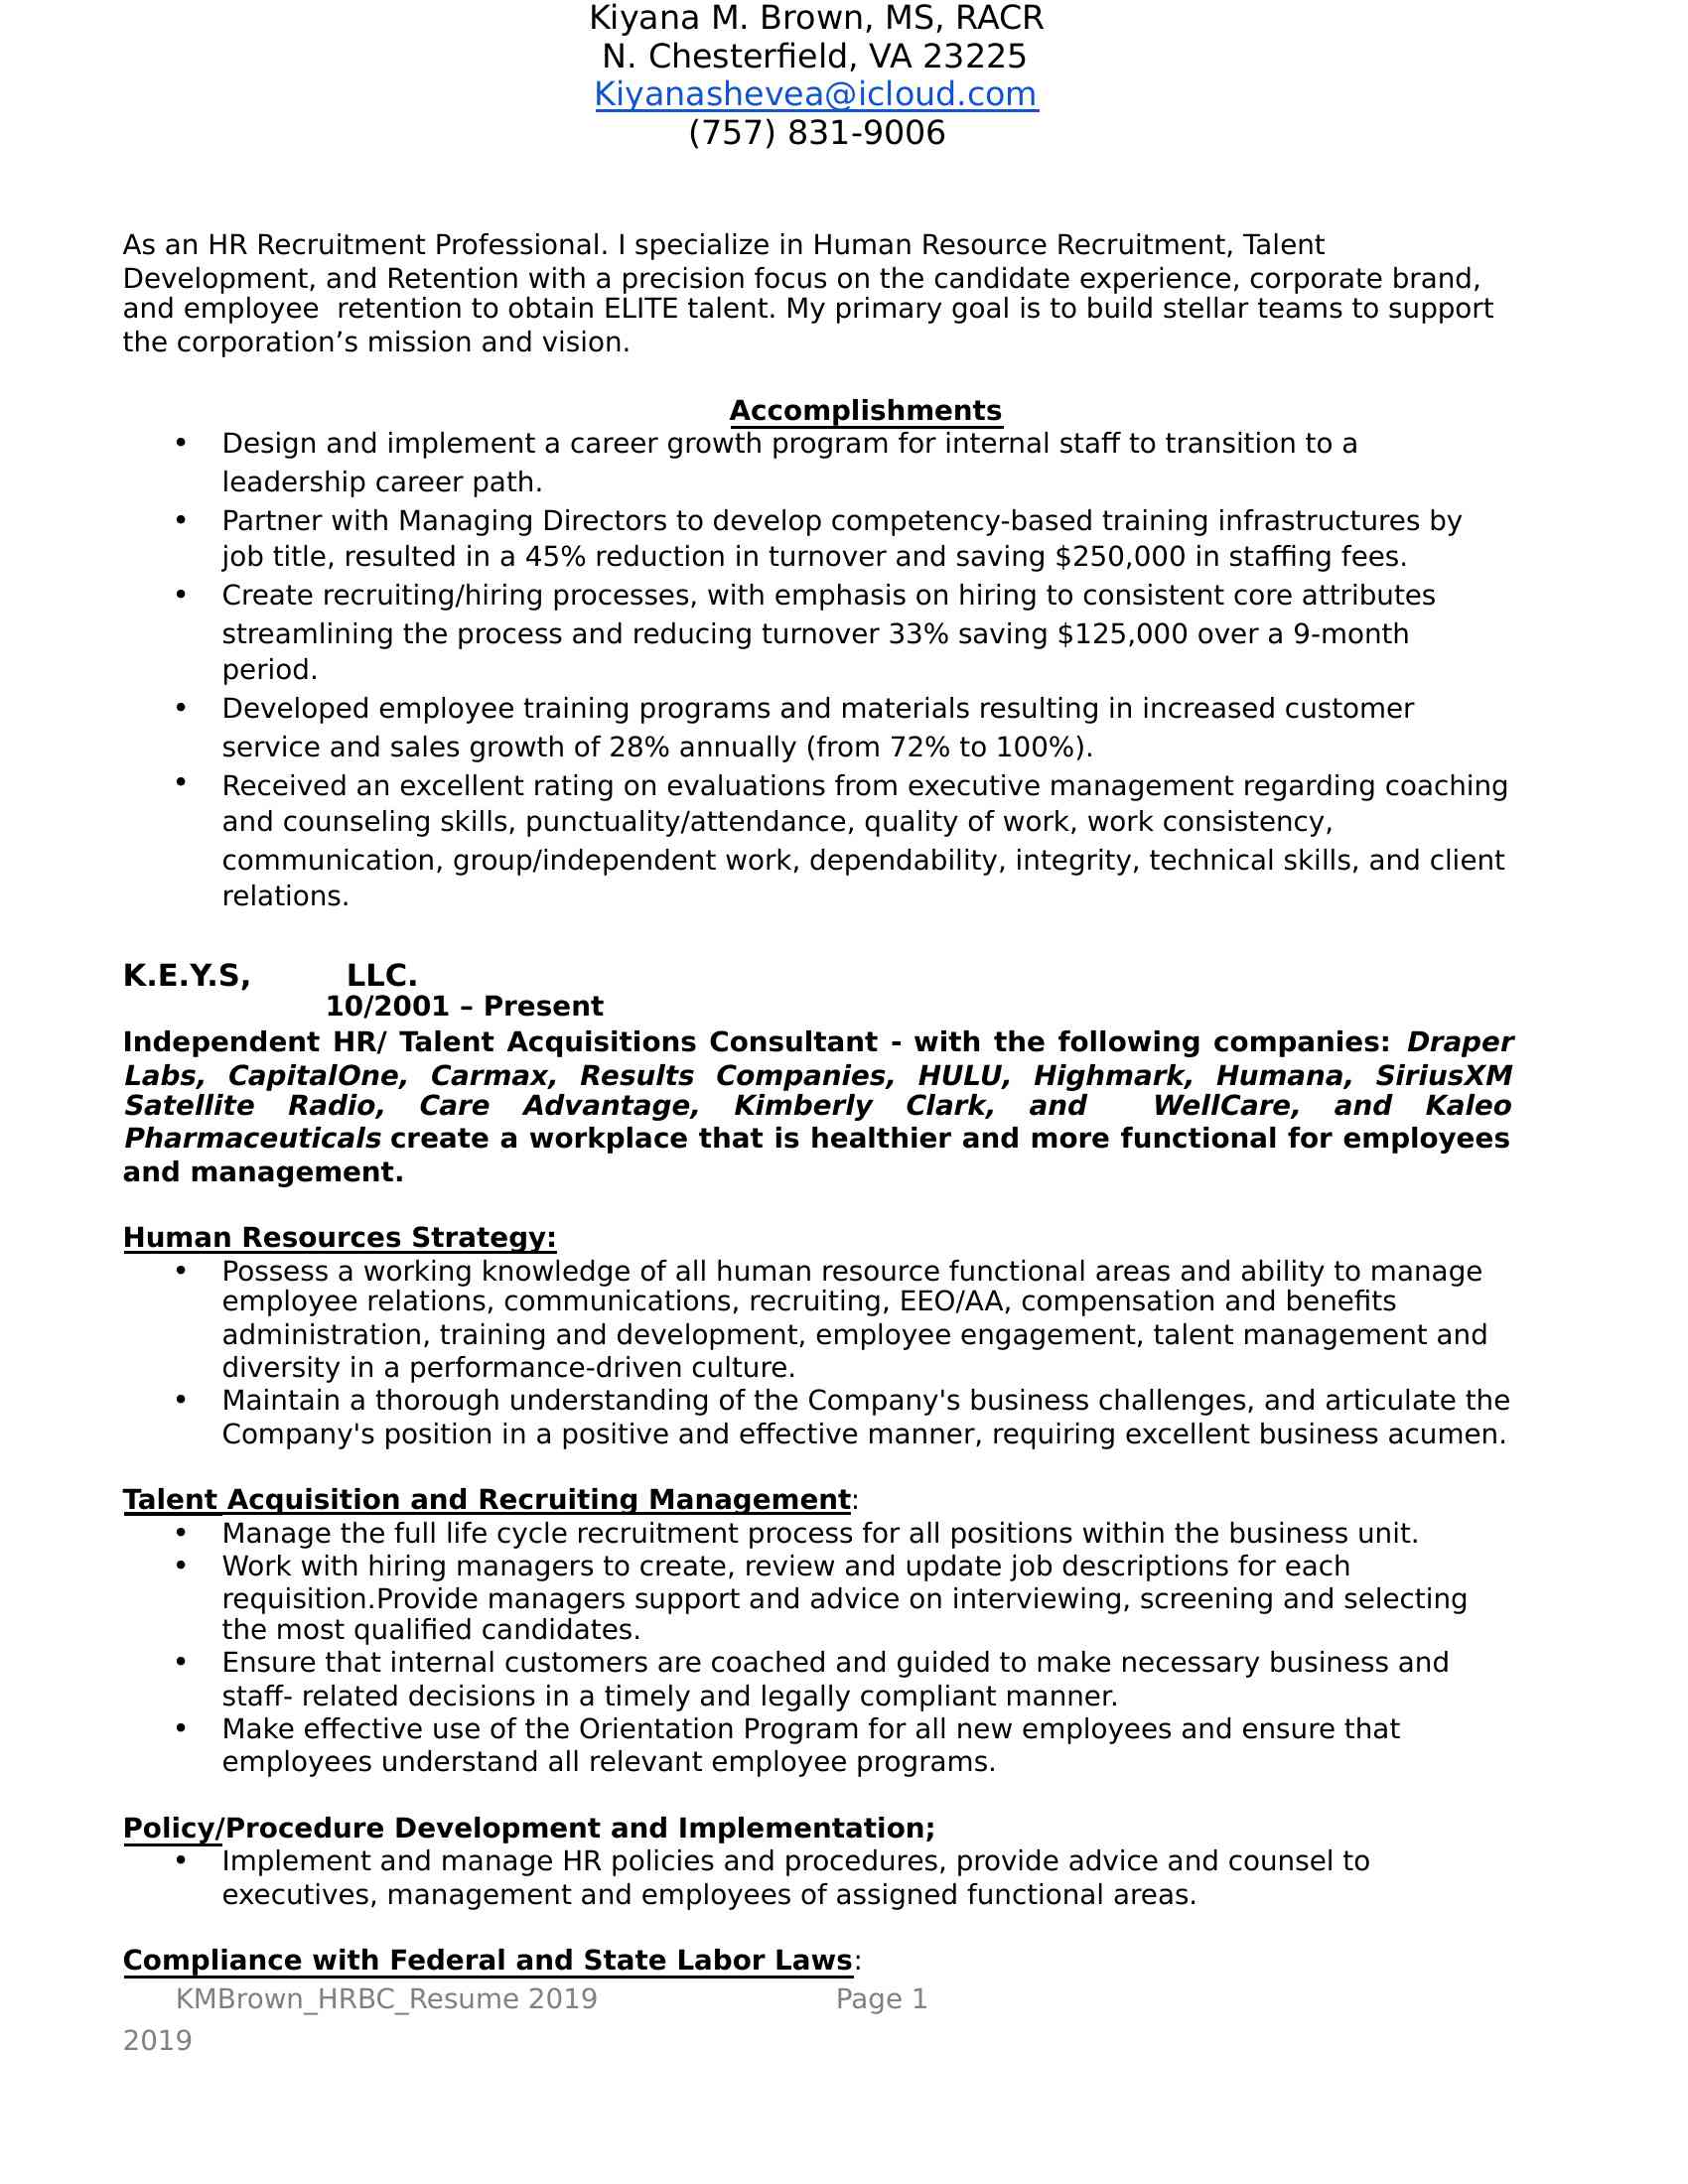 As an HR Recruitment Professional. I specialize in Human Resource Recruitment, Talent Development, and Retention with a precision focus on the candidate experience, corporate brand, and employee retention to obtain ELITE talent. My primary goal is to build stellar teams to support the corporation’s mission and vision.<BR>Accomplishments<BR>  Design and implement a career growth program for internal staff to transition to a leadership career path. <BR>  Partner with Managing Directors to develop competency-based training infrastructures by job title, resulted in a 45% reduction in turnover and saving $250,000 in staffing fees.<BR>  Create recruiting/hiring processes, with emphasis on hiring to consistent core attributes streamlining the process and reducing turnover 33% saving $125,000 over a 9-month period.<BR>  Developed employee training programs and materials resulting in increased customer service and sales growth of 28% annually (from 72% to 100%). <BR>  Received an excellent rating on evaluations from executive management regarding coaching and counseling skills, punctuality/attendance, quality of work, work consistency, communication, group/independent work, dependability, integrity, technical skills, and client relations.<BR>K.E.Y.S, LLC.                                                                                 10/2001 – Present<BR>Independent HR/ Talent Acquisitions Consultant - with the following companies: Draper Labs, CapitalOne, Carmax, Results Companies, HULU, Highmark, Humana, SiriusXM Satellite Radio, Care Advantage, Kimberly Clark, and WellCare, and Kaleo Pharmaceuticals create a workplace that is healthier and more functional for employees and management.<BR>Human Resources Strategy:<BR>  Possess a working knowledge of all human resource functional areas and ability to manage employee relations, communications, recruiting, EEO/AA, compensation and benefits administration, training and development, employee engagement, talent management and diversity in a performance-driven culture.<BR>  Maintain a thorough understanding of the Company's business challenges, and articulate the Company's position in a positive and effective manner, requiring excellent business acumen.<BR>Talent Acquisition and Recruiting Management:<BR>  Manage the full life cycle recruitment process for all positions within the business unit.<BR>  Work with hiring managers to create, review and update job descriptions for each requisition. Provide managers support and advice on interviewing, screening and selecting the most qualified candidates.<BR>  Ensure that internal customers are coached and guided to make necessary business and staff- related decisions in a timely and legally compliant manner.<BR>  Make effective use of the Orientation Program for all new employees and ensure that employees understand all relevant employee programs.<BR>Policy/Procedure Development and Implementation;<BR>  Implement and manage HR policies and procedures, provide advice and counsel to executives, management and employees of assigned functional areas. <BR>Compliance with Federal and State Labor Laws:<BR>  Minimize business risk and enhance the company culture by ensuring that all management are trained in all required legal subject areas, such as Compliance, Code of Conduct, Diversity & Sexual Harassment, Interviewing and Selection Skills, and Employment Law. <BR>  Work to ensure all Affirmative Action and government requirements (Federal, State and Local), filings, postings, and laws are satisfied for the business unit. <BR>Talent Management and Retention: <BR>  Create and drive organizational development initiatives and opportunities.<BR>  Contribute to developing and sustaining culture where teamwork and high levels of employee engagement, reward and recognition are leveraged to drive "in the moment" problem solving to uncover the root cause, and to maximize retention.<BR>  Lead the ongoing talent review process. Assess and identify high performing / high potential leaders, and ensure succession and development plans are in place. <BR>  Coach and assist with the development of Field Managers.<BR>  Coach leaders and managers to develop and enhance their leadership and management effectiveness, demonstrating alignment with company values.<BR>  Coordinate, develop and deliver training and group presentations related to new programs, processes and other HR initiatives.<BR>RemX Staffing, Inc                                                                   11/2018 – 02/2019<BR>Contract - Corporate Recruiting Manager with Bio-Pharmaceuticals company recruited entry level Lab Technician, Lab Research Associates, Chemists, and R&D Scientists.<BR>  Led and managed the full life cycle recruitment to include ensuring up-to-date job descriptions, posting open positions internally and externally, responding to inquiries about the Company’s recruitment activities and status of jobs, contacting candidates, scheduling interviews, developing interview questions, checking references, providing feedback to unsuccessful candidates, and preparing job offer materials.<BR>  Collaborated with managers to understand and prioritize job opening requirements and develop recruitment strategies appropriate for their business needs.<BR>  Collaborates with hiring manager and HR team on appropriate compensation for position and geographic scope of search (local, national or global).<BR>  Managed relationships with recruitment agencies to ensure satisfactory standards of service through implementation of performance measures and negotiates pricing / contracts.<BR>  Promoted the Company’s reputation through advertising, career site design, and interaction with candidates<BR>  Developed an effective pipeline of passive talent to anticipate future hiring needs.    <BR>  Updated current and designs new recruiting procedures to keep pace with best practices, to include implementation of new sourcing methods (e.g., social recruiting and Boolean searches).   <BR>  Developed and administers interview and other relevant training to hiring managers.<BR>  Continued to develop and communicate the company’s internship program, including developing and maintaining relationships with appropriate colleges and universities. <BR>  Created and managed the Company’s social media program in accordance with the Company’s policies and standards, to promote the Company’s reputation and overall employment branding.                                                      <BR>  Maintained and reported to senior executive management the appropriate recruiting metrics (e.g., time-to-hire, cost-per-hire, turnover rate, and sourcing cost).<BR>The Nagler Group (Contract)                                                             02/2015 - 01/2016<BR>Corporate Recruiting Consultant V - Comcast Call Center Sales, Billing, and Technical Support Representatives.<BR>  Led and managed the full life cycle recruitment to include ensuring up-to-date job descriptions, posting open positions internally and externally, responding to inquiries about the Company’s recruitment activities and status of jobs, contacting candidates, scheduling interviews, developing interview questions, checking references, providing feedback to unsuccessful candidates, and preparing job offer materials.<BR>  Collaborated with managers to understand and prioritize job opening requirements and develop recruitment strategies appropriate for their business needs.<BR>  Developed and administers interview and other relevant training to hiring managers.<BR>  Collaborates with hiring manager and HR team on appropriate compensation for position and geographic scope of search (local, national or global).<BR>  Promoted the Company’s reputation through advertising, career site design, and interaction with candidates.<BR>  Developed an effective pipeline of passive talent to anticipate future hiring needs.    <BR>  Updated current and designs new recruiting procedures to keep pace with best practices, to include implementation of new sourcing methods (e.g., social recruiting and Boolean searches).   <BR>Manpower Group, Inc.,                                                               07/2013 - 04/2015<BR>Talent Placement Mgr. recruited BioTechnology, IT, and MFG personnel from Entry level to C-suite Executives<BR>   Approached new businesses through telephone and face to face contact, to develop the STI client portfolio.<BR>  Managed, delivered and negotiated job offers to client-selected candidates: engineers, research associates, entry level lab technicians, clerical administrators, HR professionals, chemists, scientists, production analysts, accountants, and general laborers.<BR>  Expanded existing client relationships to yield additional business for other RBW specialisms.<BR>  Continually developed a robust understanding of client companies, their industry, what they do, plus their work culture and environment.<BR>   Used internal developed sales, business development and marketing techniques, as well as, networking to attract new business from target companies.<BR>   Built, trained, and mentor a team of 7 recruiters and coordinators across two (2) locations (Richmond/Newport New, VA).<BR>Chesapeake Government Health Services, LLC.                                         04/2011 - 02/2013<BR>Healthcare Recruiter Mgr. DOD Staffing Contracts - PT, OT, SLP, Nurses, Surgeons, Family Medicine, Pediatrics, and Speciality MDs.<BR>  Led the Talent Acquisition & Development function and partner with key military staffing leaders and treatment facility managers to develop a thorough knowledge of the business, culture (Joint Task Force Division), and value proposition to staff medical treatment facilities with medical personnel/professionals.<BR>   Engaged with business leaders and human resources partners to determine capability needs and roll-up into a workforce plans.<BR>  Defined action plans to achieve the workforce plan, in the areas of acquisition, development, re-skilling, redeploying and reduction planning..<BR>  Managed the movement of talent across the business ensuring that policies and practices are efficient and consistent with CGHS.<BR>  Provided direction and management to recruiters, recruitment agencies, and outsource partners.<BR>   Kept abreast of market changes and trends to minimize impact on workforce and talent pipeline.<BR>   Ensured that all candidates experience an exceptional interview, on-boarding/sponsorship process.<BR>  Worked with global Center of Excellence and Business Partners to implement development and learning strategies.<BR>Staffing Concepts, Inc.                                                 02/2009 - 01/2011         <BR>Sr. Staffing Manager<BR>  Led and managed the full life cycle recruitment to include ensuring up-to-date job descriptions, posting open positions internally and externally, responding to inquiries about the Company’s recruitment activities and status of jobs, contacting candidates, scheduling interviews, developing interview questions, checking references, providing feedback to unsuccessful candidates, and preparing job offer materials.<BR>  Approached new businesses through telephone and face to face contact, to develop the STI client portfolio.<BR>   Built, trained, and mentor a team of eight ( 8) recruiters and coordinators across two (2) locations (Pelham/Hudson, NH).<BR>Technical Needs South, Inc.,                                                                09/1999 - 12/2008<BR>Sr. Technical Recruiter<BR>  Led and managed the full life cycle recruitment to include ensuring up-to-date job descriptions, posting open positions internally and externally, responding to inquiries about the Company’s recruitment activities and status of jobs, contacting candidates, scheduling interviews, developing interview questions, checking references, providing feedback to unsuccessful candidates, and preparing job offer materials.<BR>  Approached new businesses through telephone and face to face contact, to develop the STI client portfolio.<BR>  Built, trained, and mentor a team of  twelve (12) recruiters and coordinators across three (3) locations (Salem, NH, Burlington, MA, and Woburn, MA).<BR>Education<BR>Management and Strategy Institute (MSI)                                                 10/2010 -Present<BR>  Certified Corporate Trainer<BR>Lean Human Capital – Recruiter Academy                                                 09/2012 - Present<BR>   Recruiter Academy -Certified Healthcare Recruiter<BR>Expert Rating Institute                                                                     02/2015 - Present<BR>  Certified Master Life Coach<BR>Ashworth University – Norcross, GA (DETC)                                              08/2009 - 12/2013<BR>  Master of Science Leadership, Management, and Strategy (MSM)<BR>  Bachelors of Science Management/ with a minor in general psychology<BR>  Course Work Completed.<BR>Society For Human Resource Management (SHRM)                                            05/2019 - Present<BR>        ● Professional Membership<BR>Kiyana M. Brown, MSM<BR>Lowell. MA 01854<BR>(XXX) XXX-XXXX<BR>XXXX@XXXX.XXX<BR>Kiyana M. Brown, MS, RACR<BR>N. Chesterfield, VA 23225<BR>XXXX@XXXX.XXX<BR>(XXX) XXX-XXXX<BR>   KMBrown_HRBC_Resume 2019              Page 1                                                      2019<BR>  KMBrown_HRBC_Resume                                     <BR>Page                                          2019